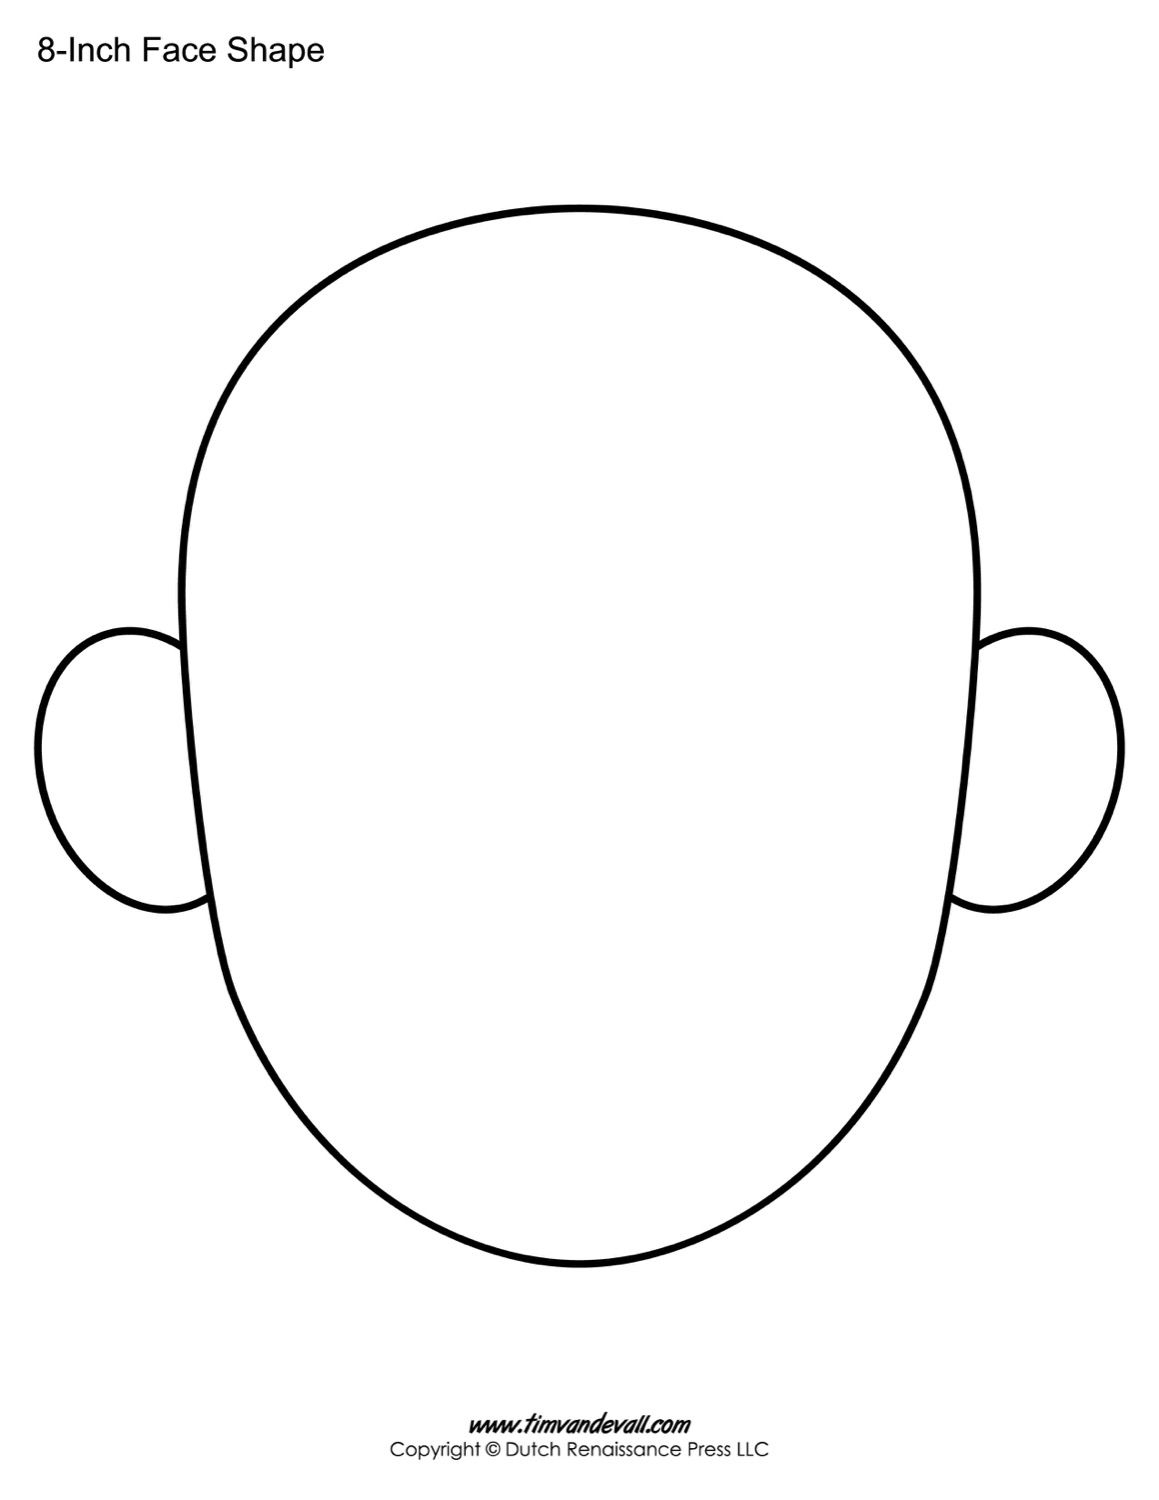 Blank Face Templates Printable Face Shapes For Kids Face Template Shapes For Kids Face Outline